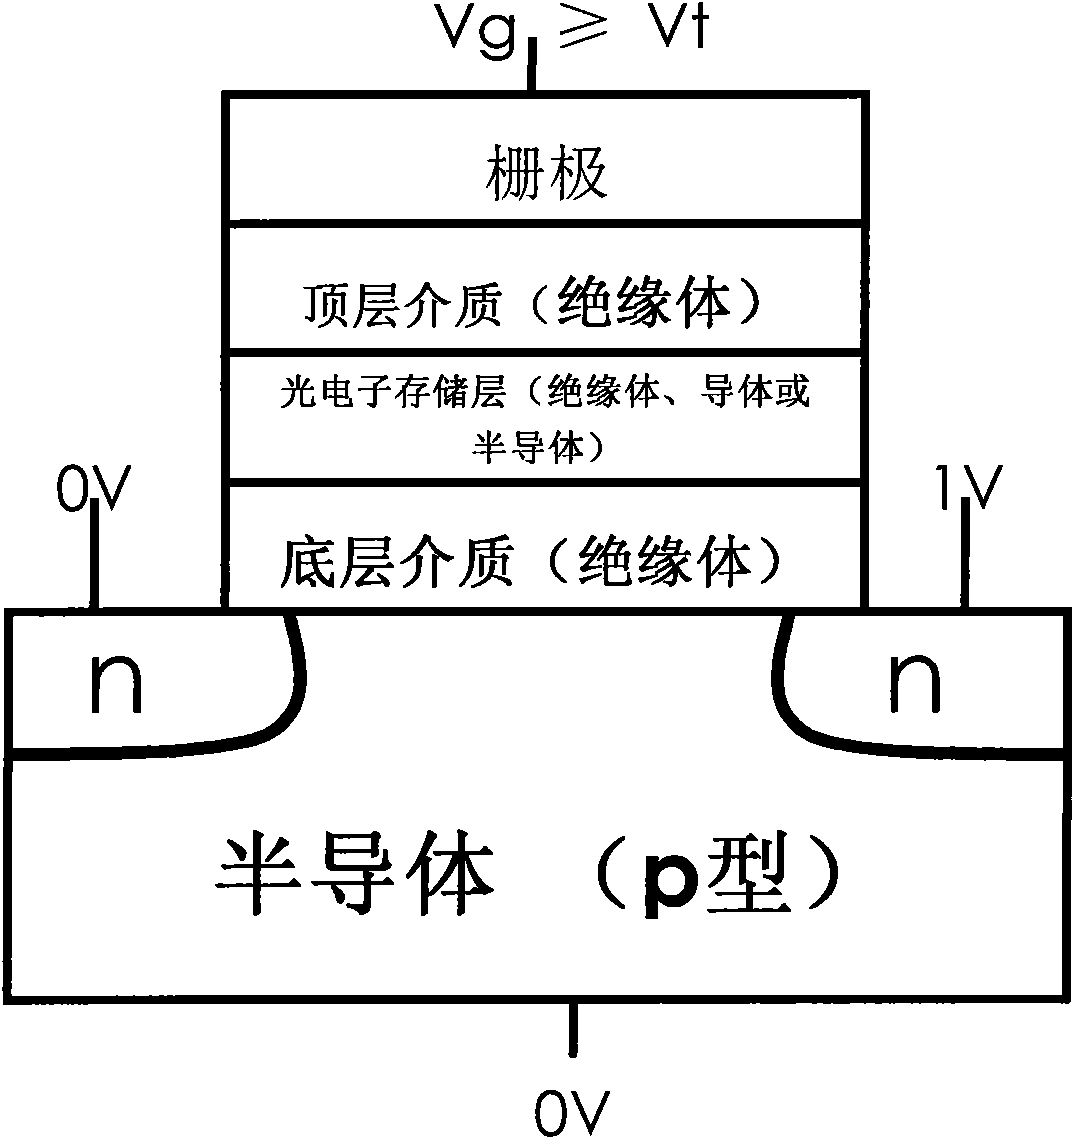 Photosensitive composite dielectric gate MOSFET (Metal-Oxide-Semiconductor Field Effect Transistor) detector